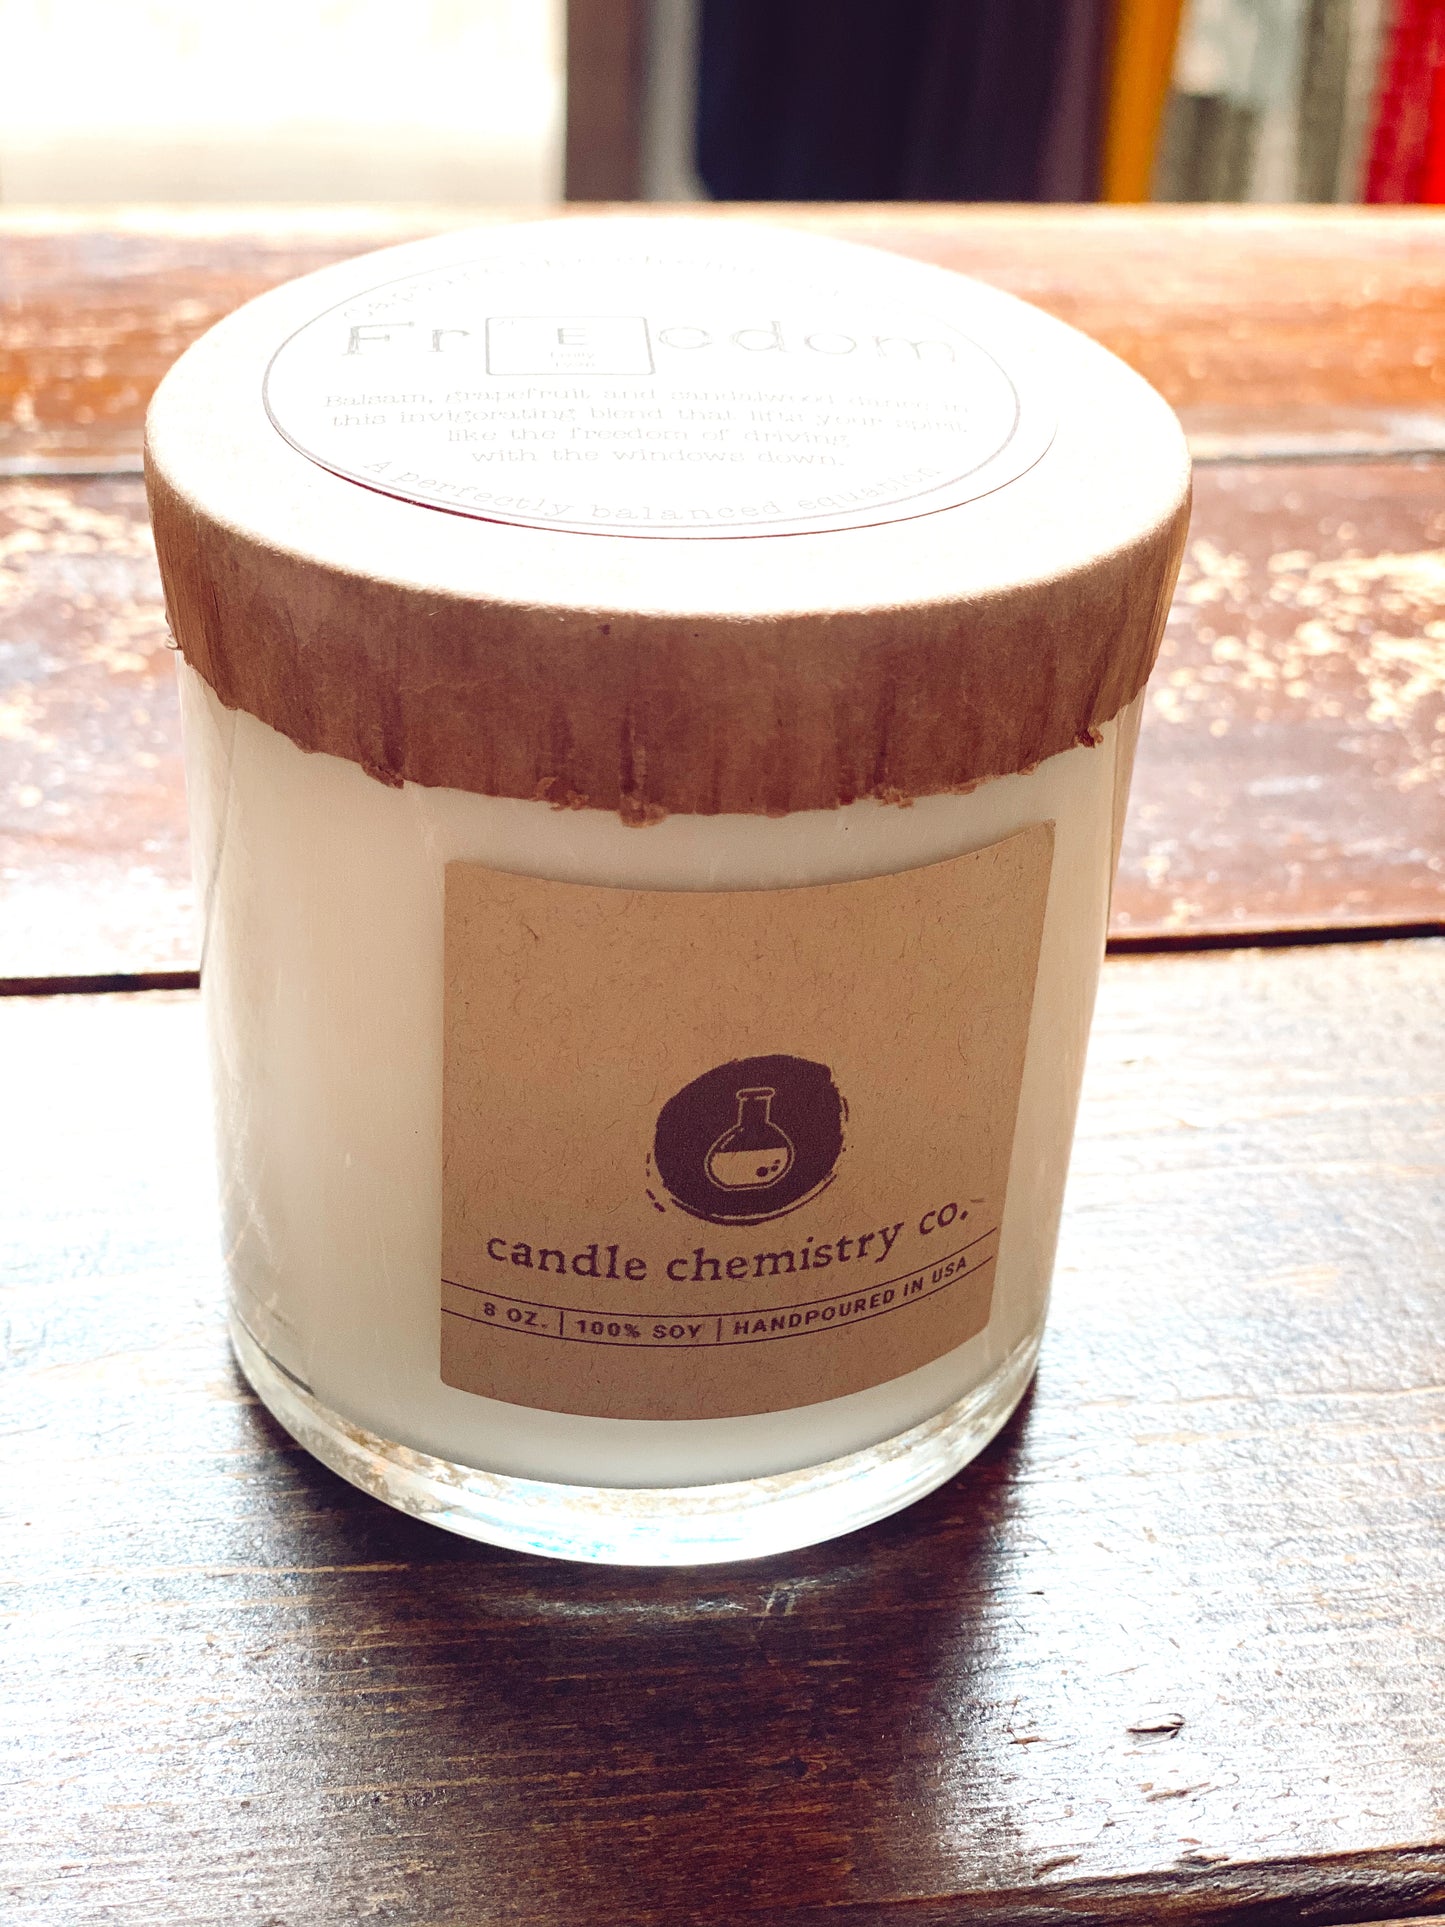 Candle Chemistry Co.